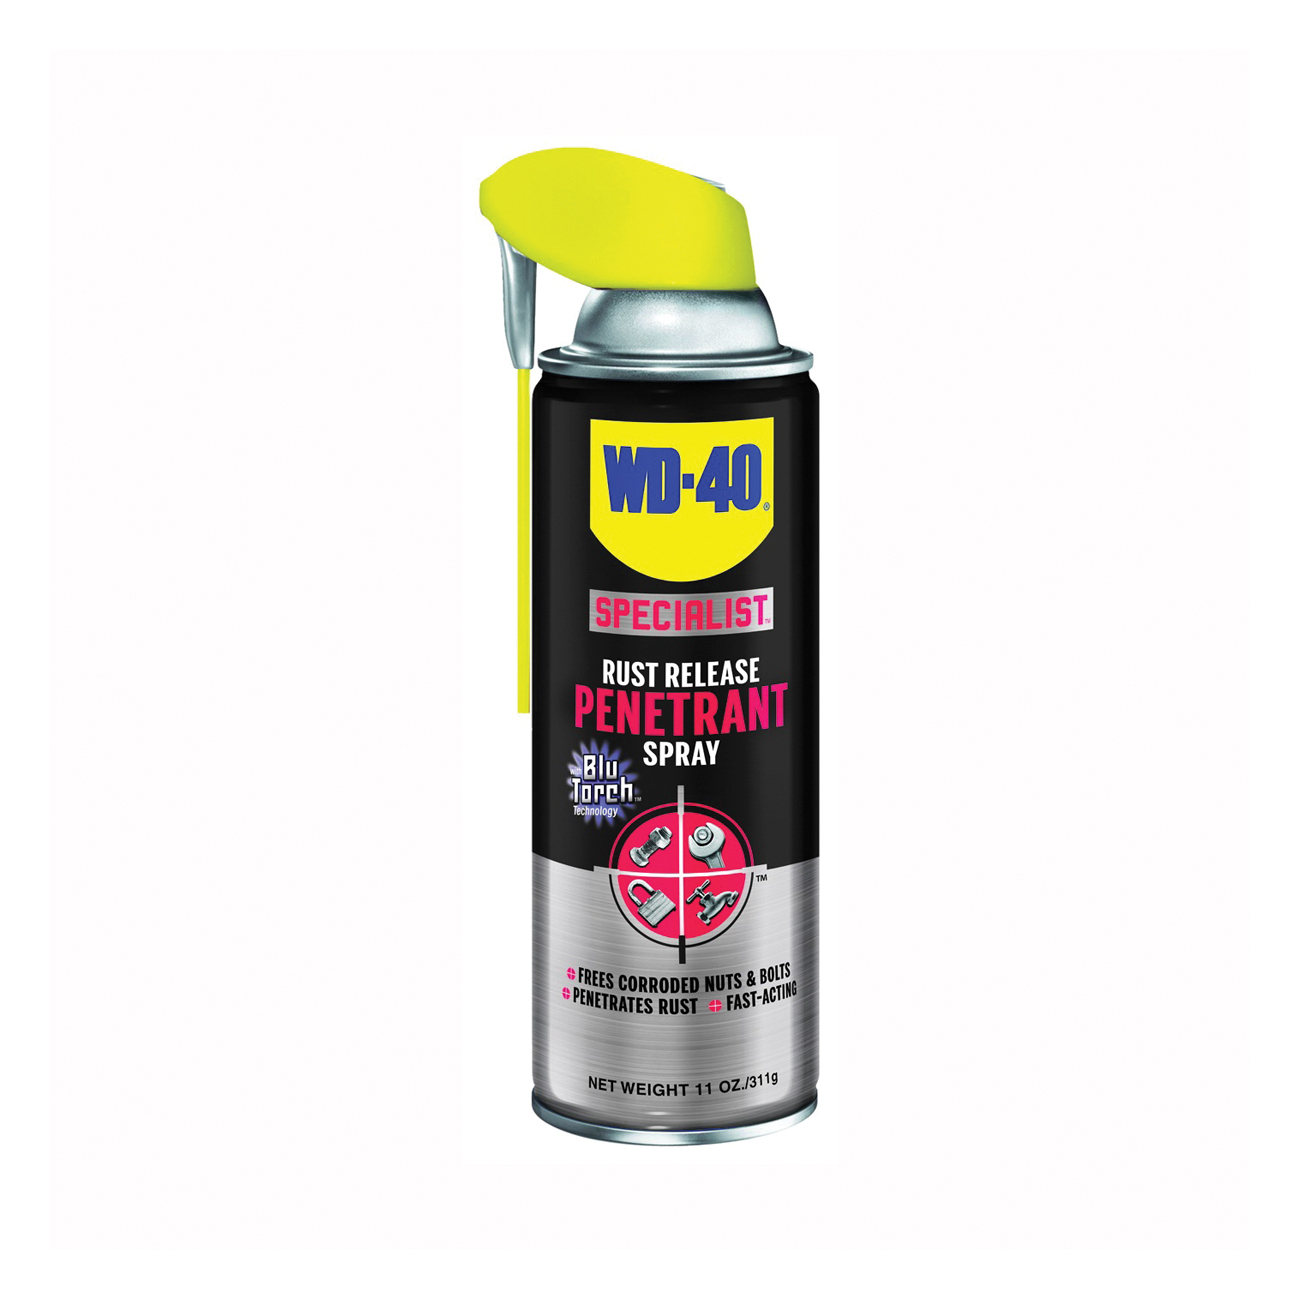 WD-40 300004